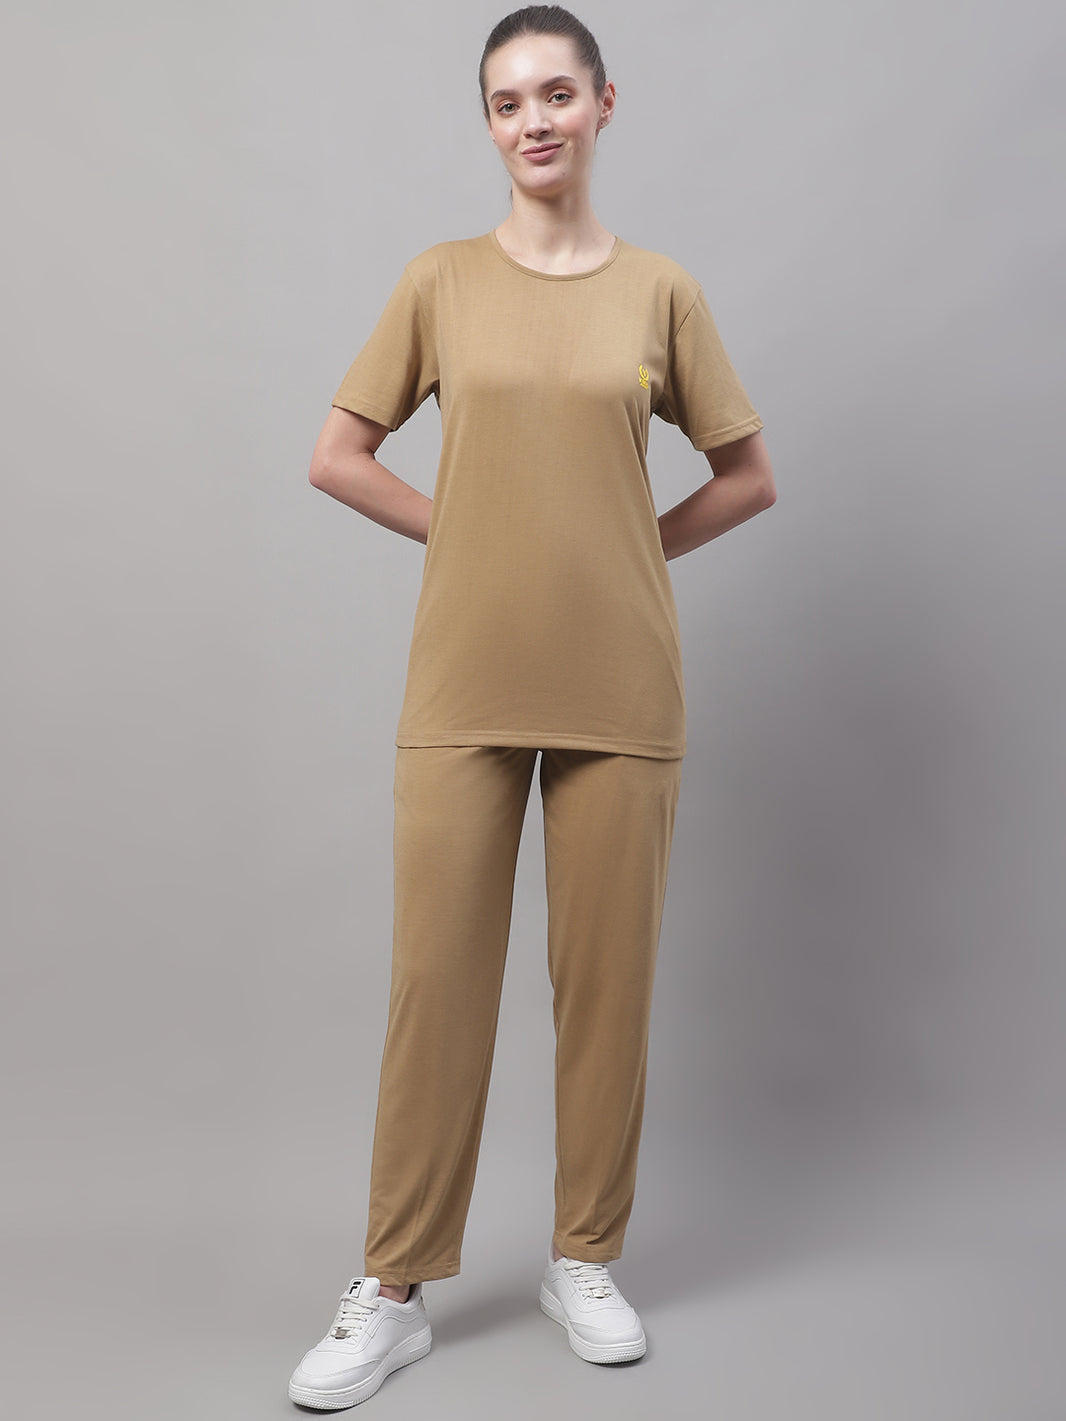 Vimal Jonney Mud Cotton Solid Co-ord Set Tracksuit For Women